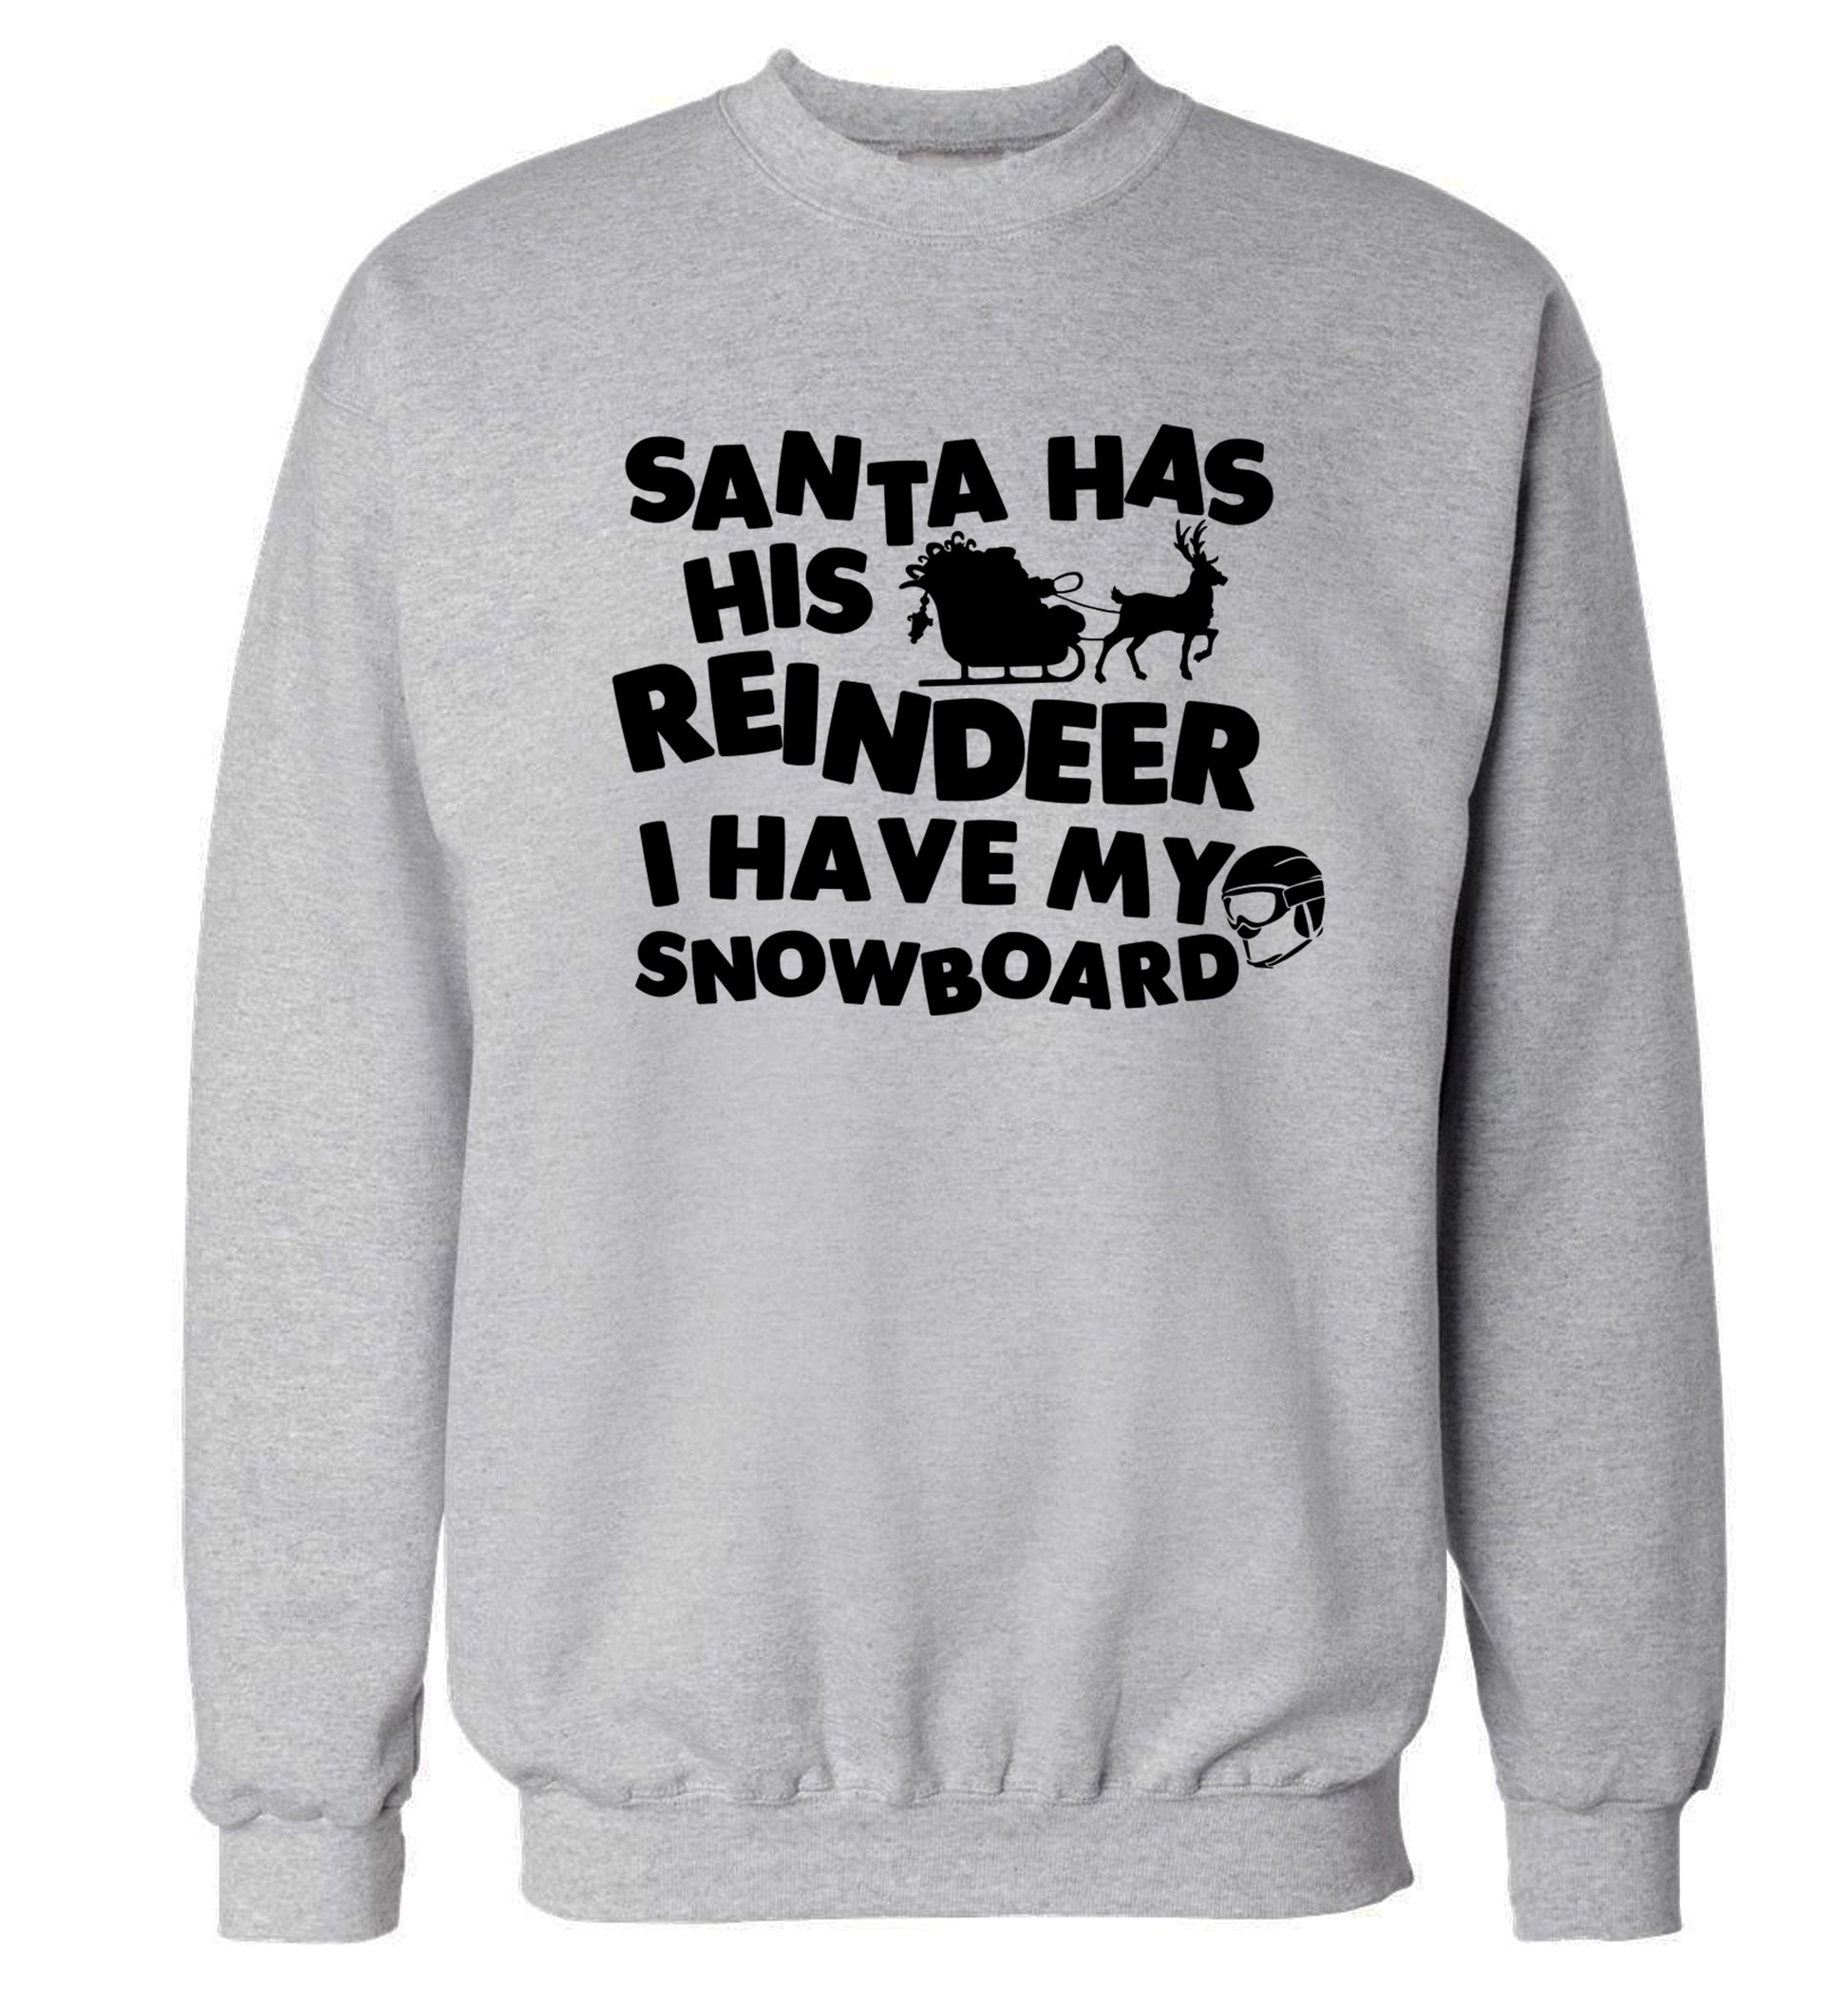 Santa has his reindeer I have my snowboard Adult's unisex grey Sweater 2XL